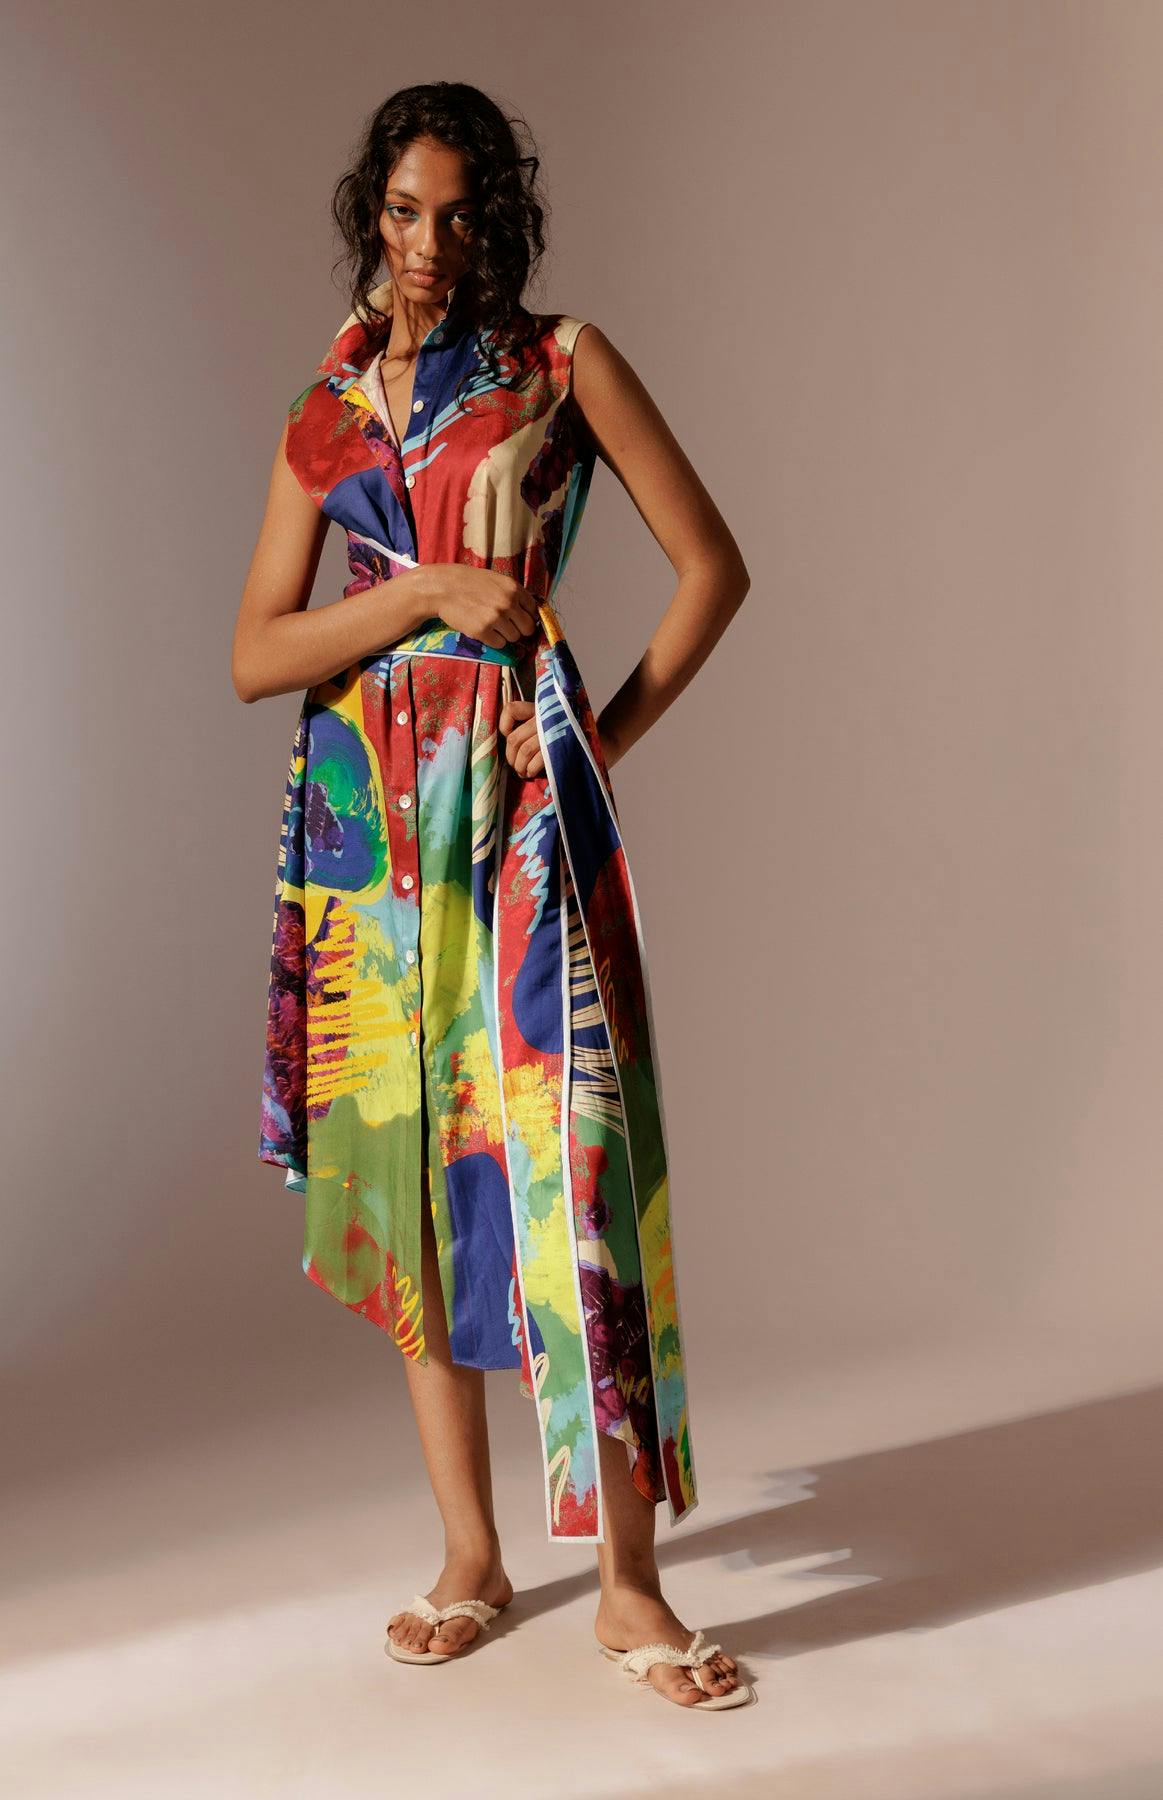 Calypso Tie Up Dress, a product by Advait India